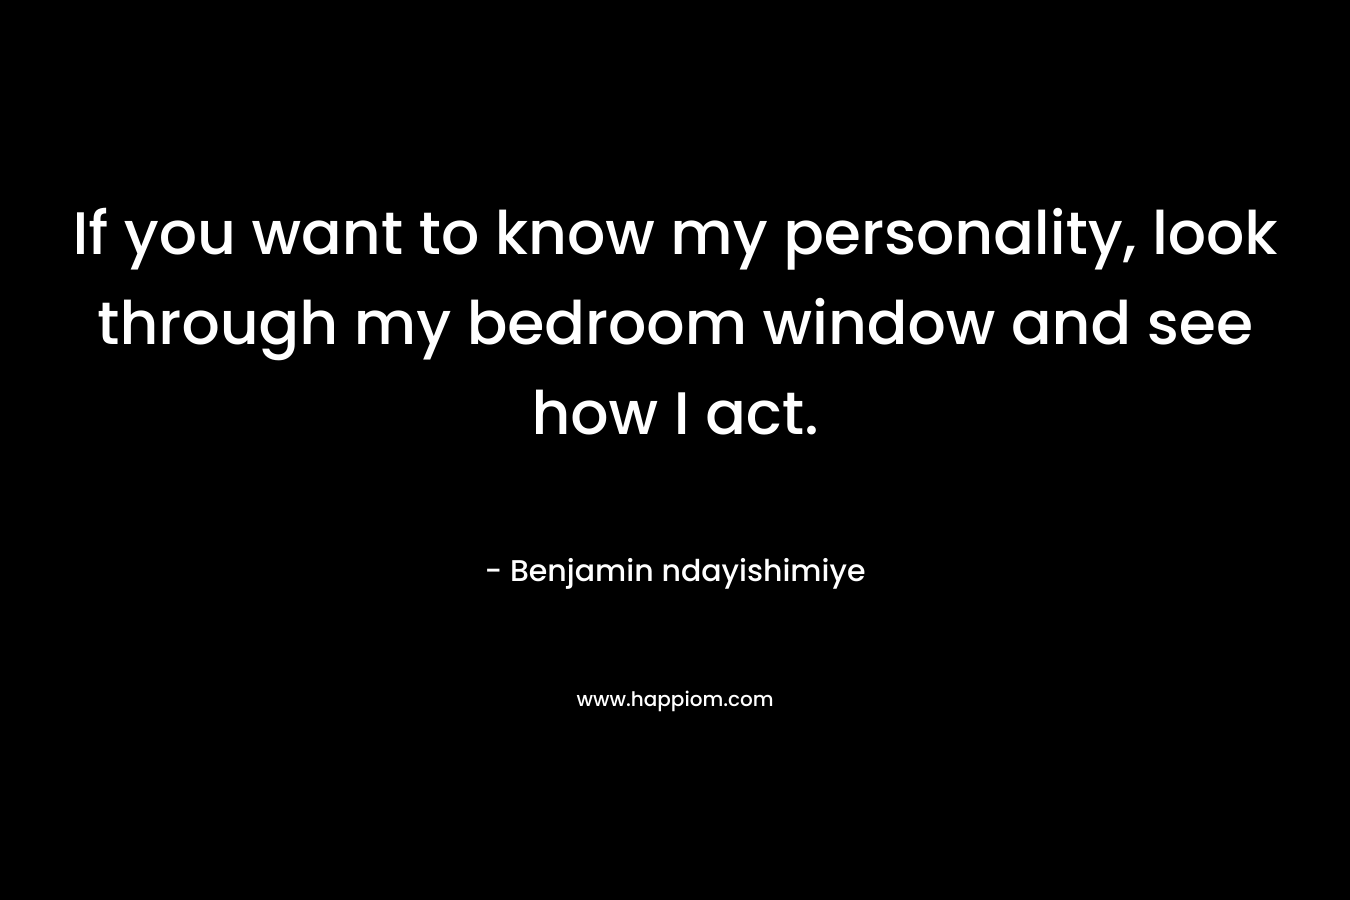 If you want to know my personality, look through my bedroom window and see how I act. – Benjamin ndayishimiye